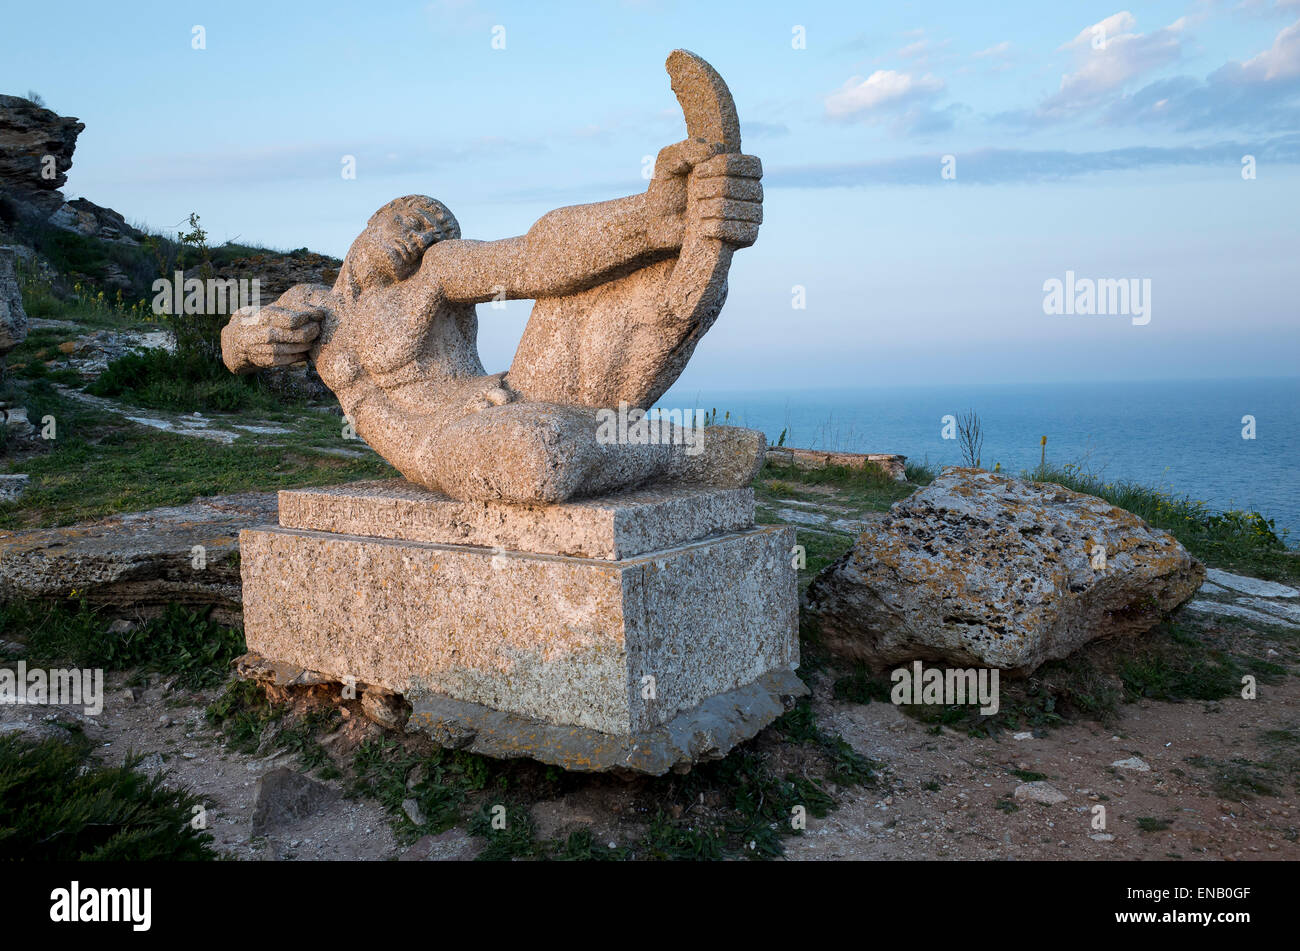 Monument to The Archer at Cape Kaliakra with the Black Sea in the background Stock Photo